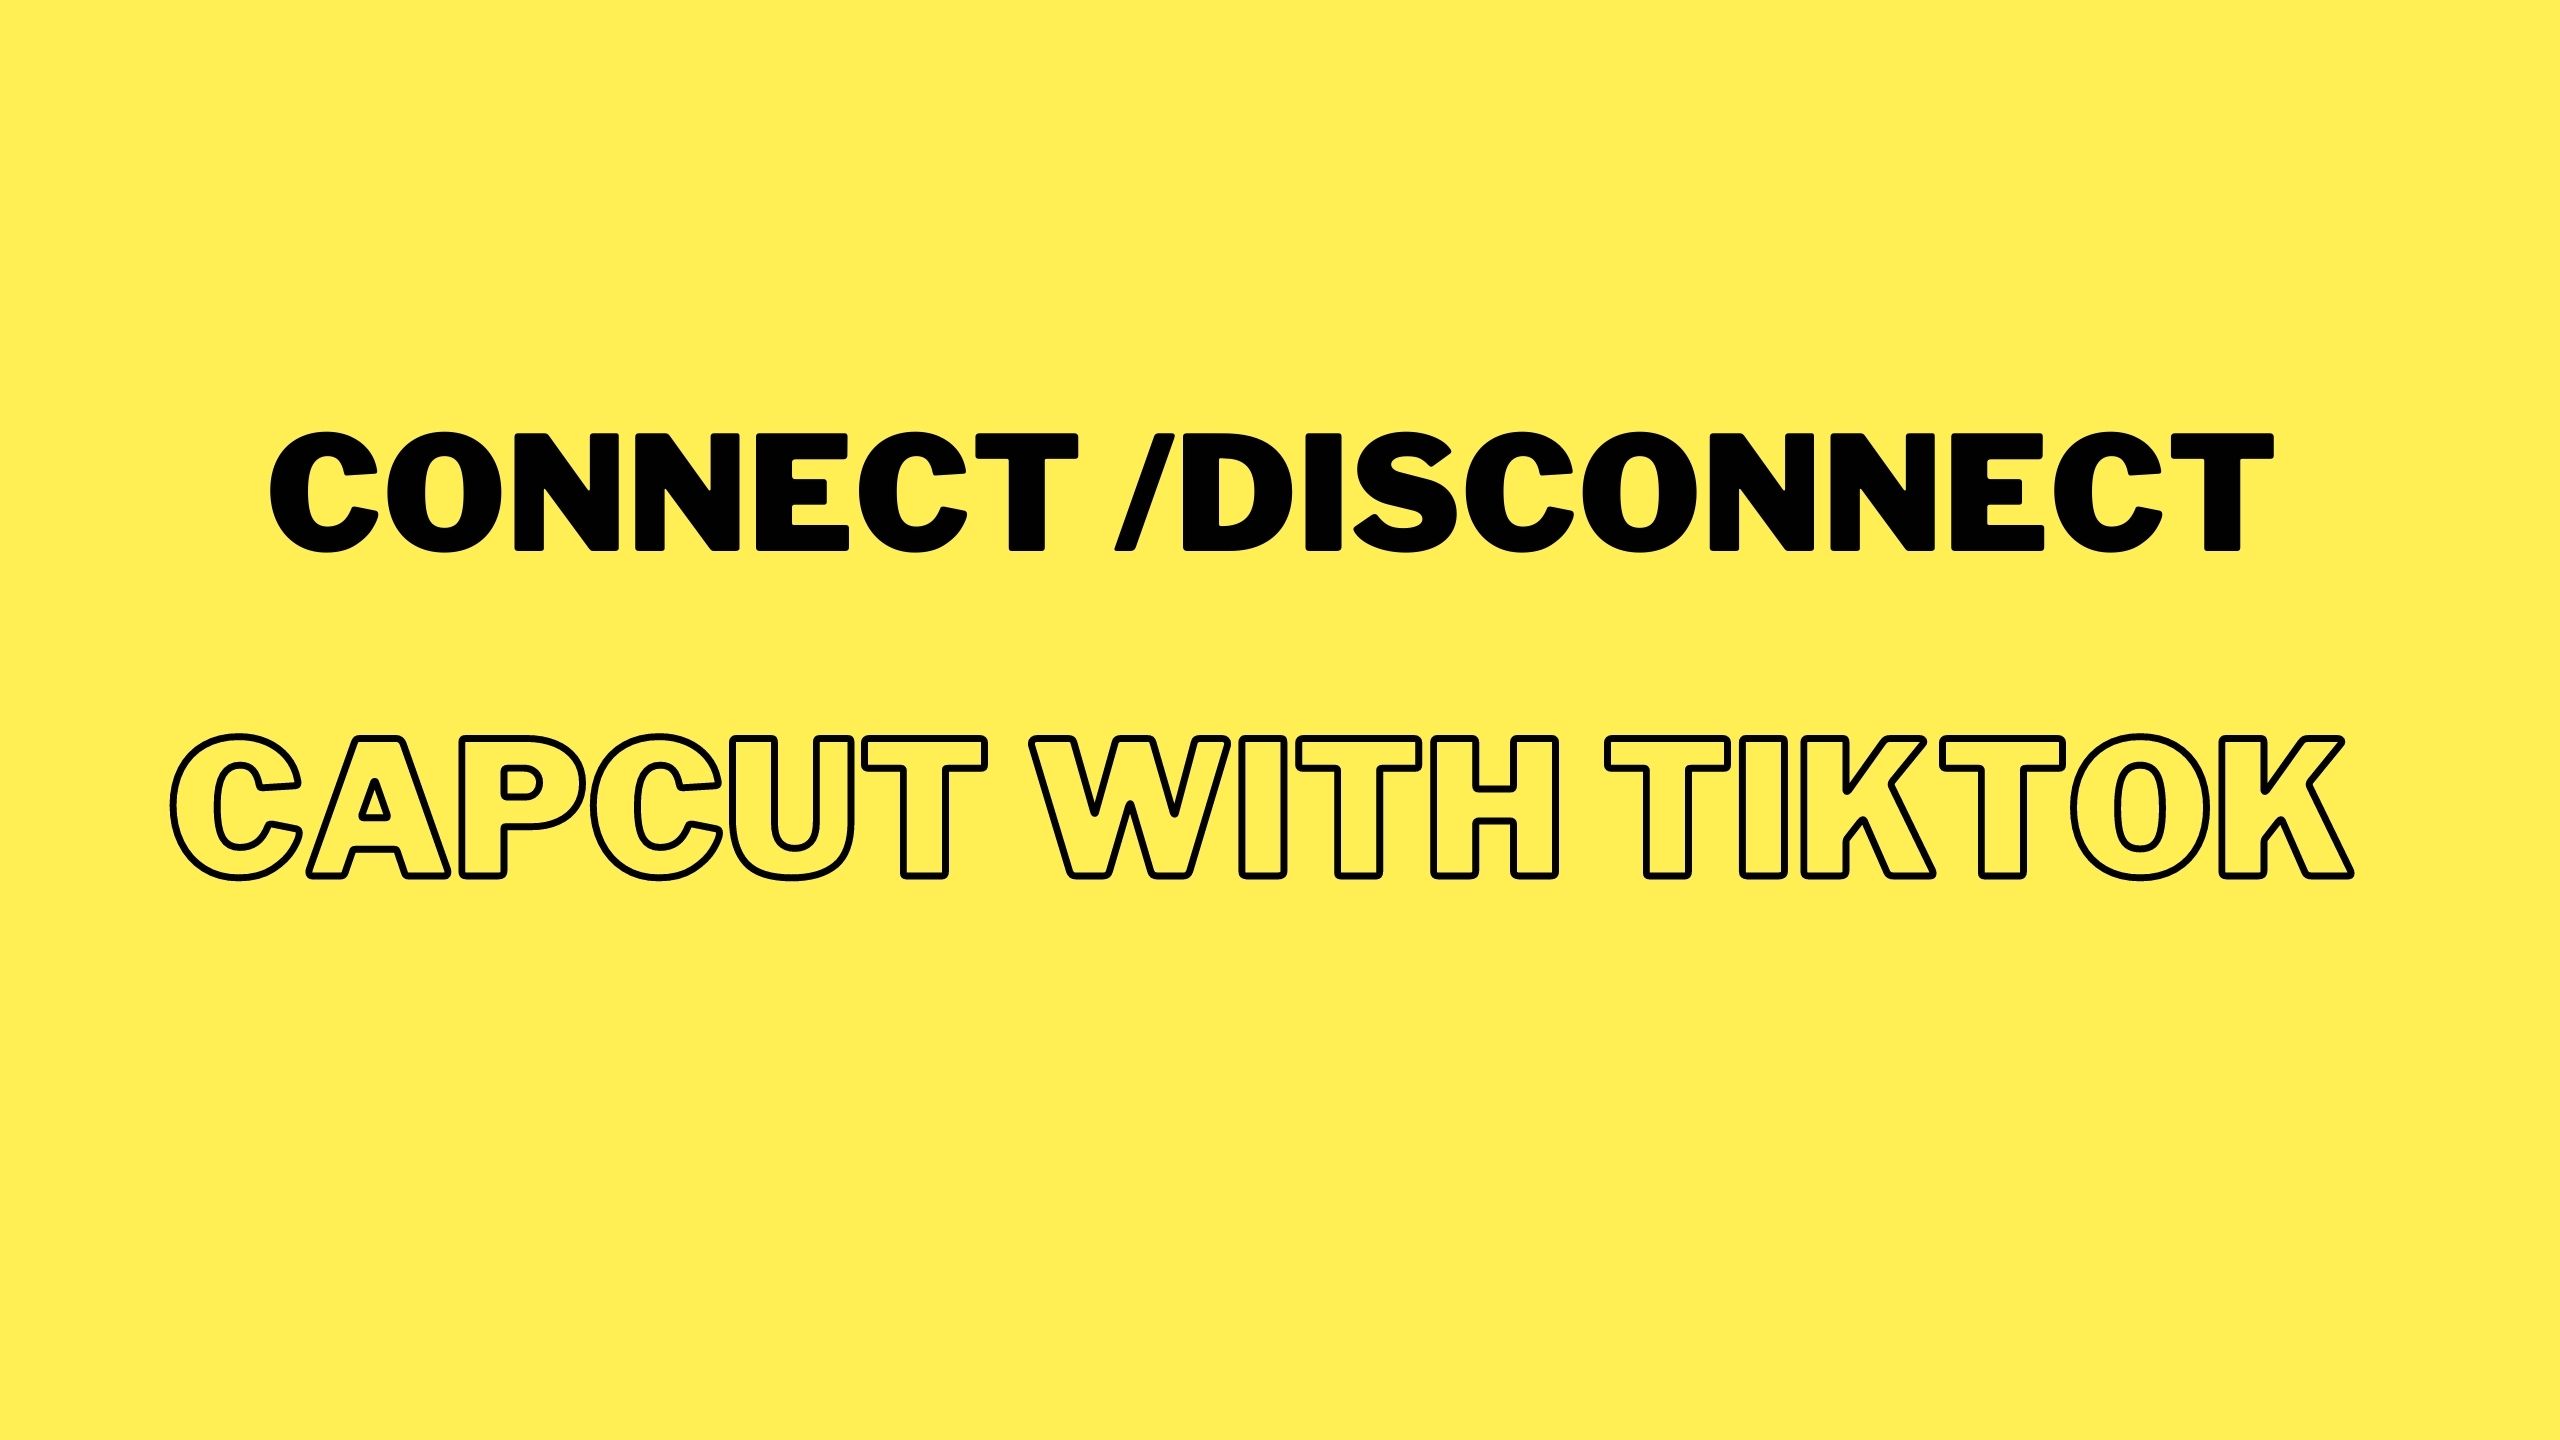 How to connect or disconnect CapCut with tiktok